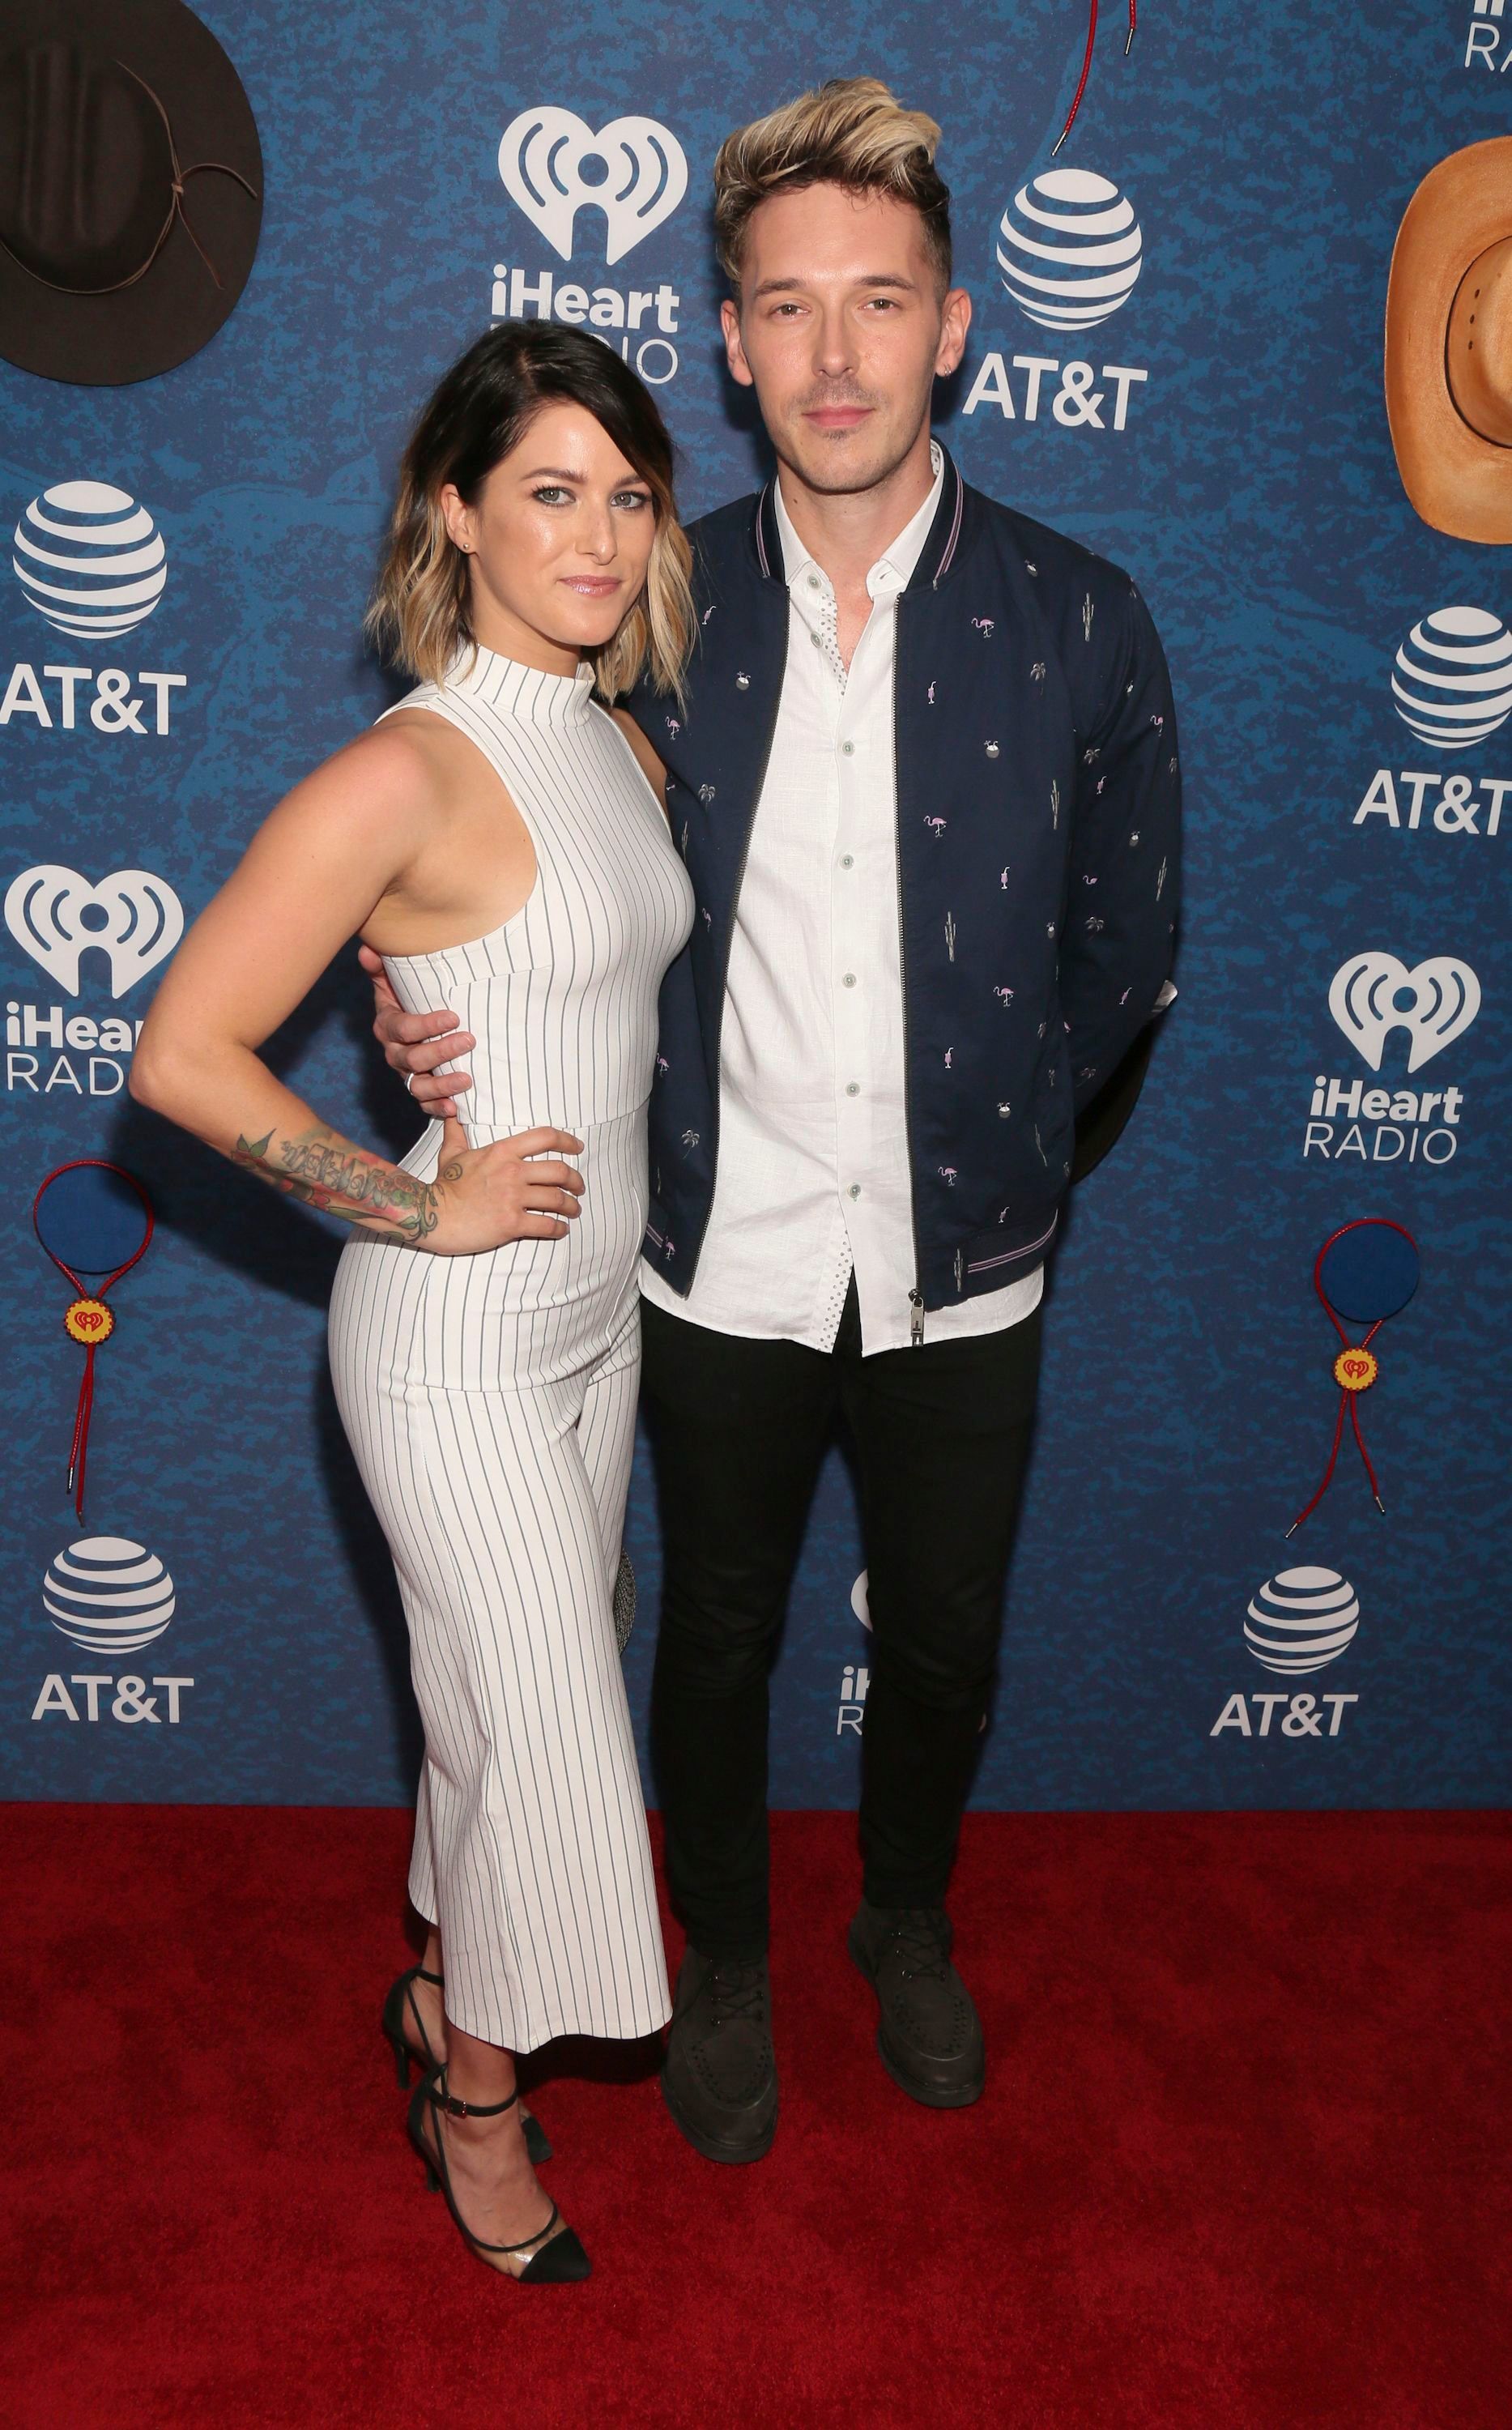 <p>"The Voice" alum Cassadee Pope and "Nashville" actor and singer Sam Palladio had known each other socially for years by the time they went on their first date in late 2017. "We met a long time ago -- I think it was at a CMA afterparty -- and it was like a hi-bye, never saw him again, never hung out," she told People magazine in March 2018. "And then, gosh, I think it was December of last year, we decided to take our dogs to the dog park... and we hit it off! I think the original idea [for the date] was his and then I was like, 'How about tomorrow?'"</p>